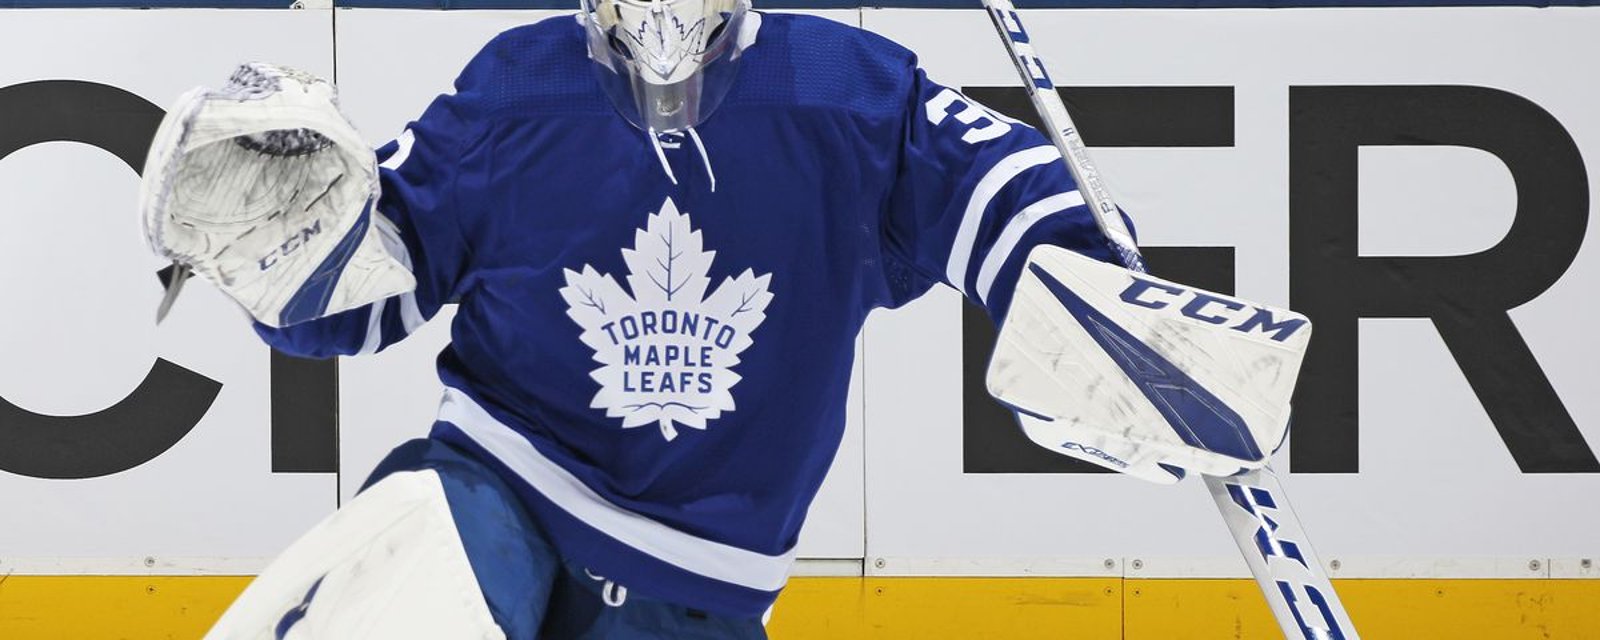 Goalie Michael Hutchinson returns to the Maple Leafs! 